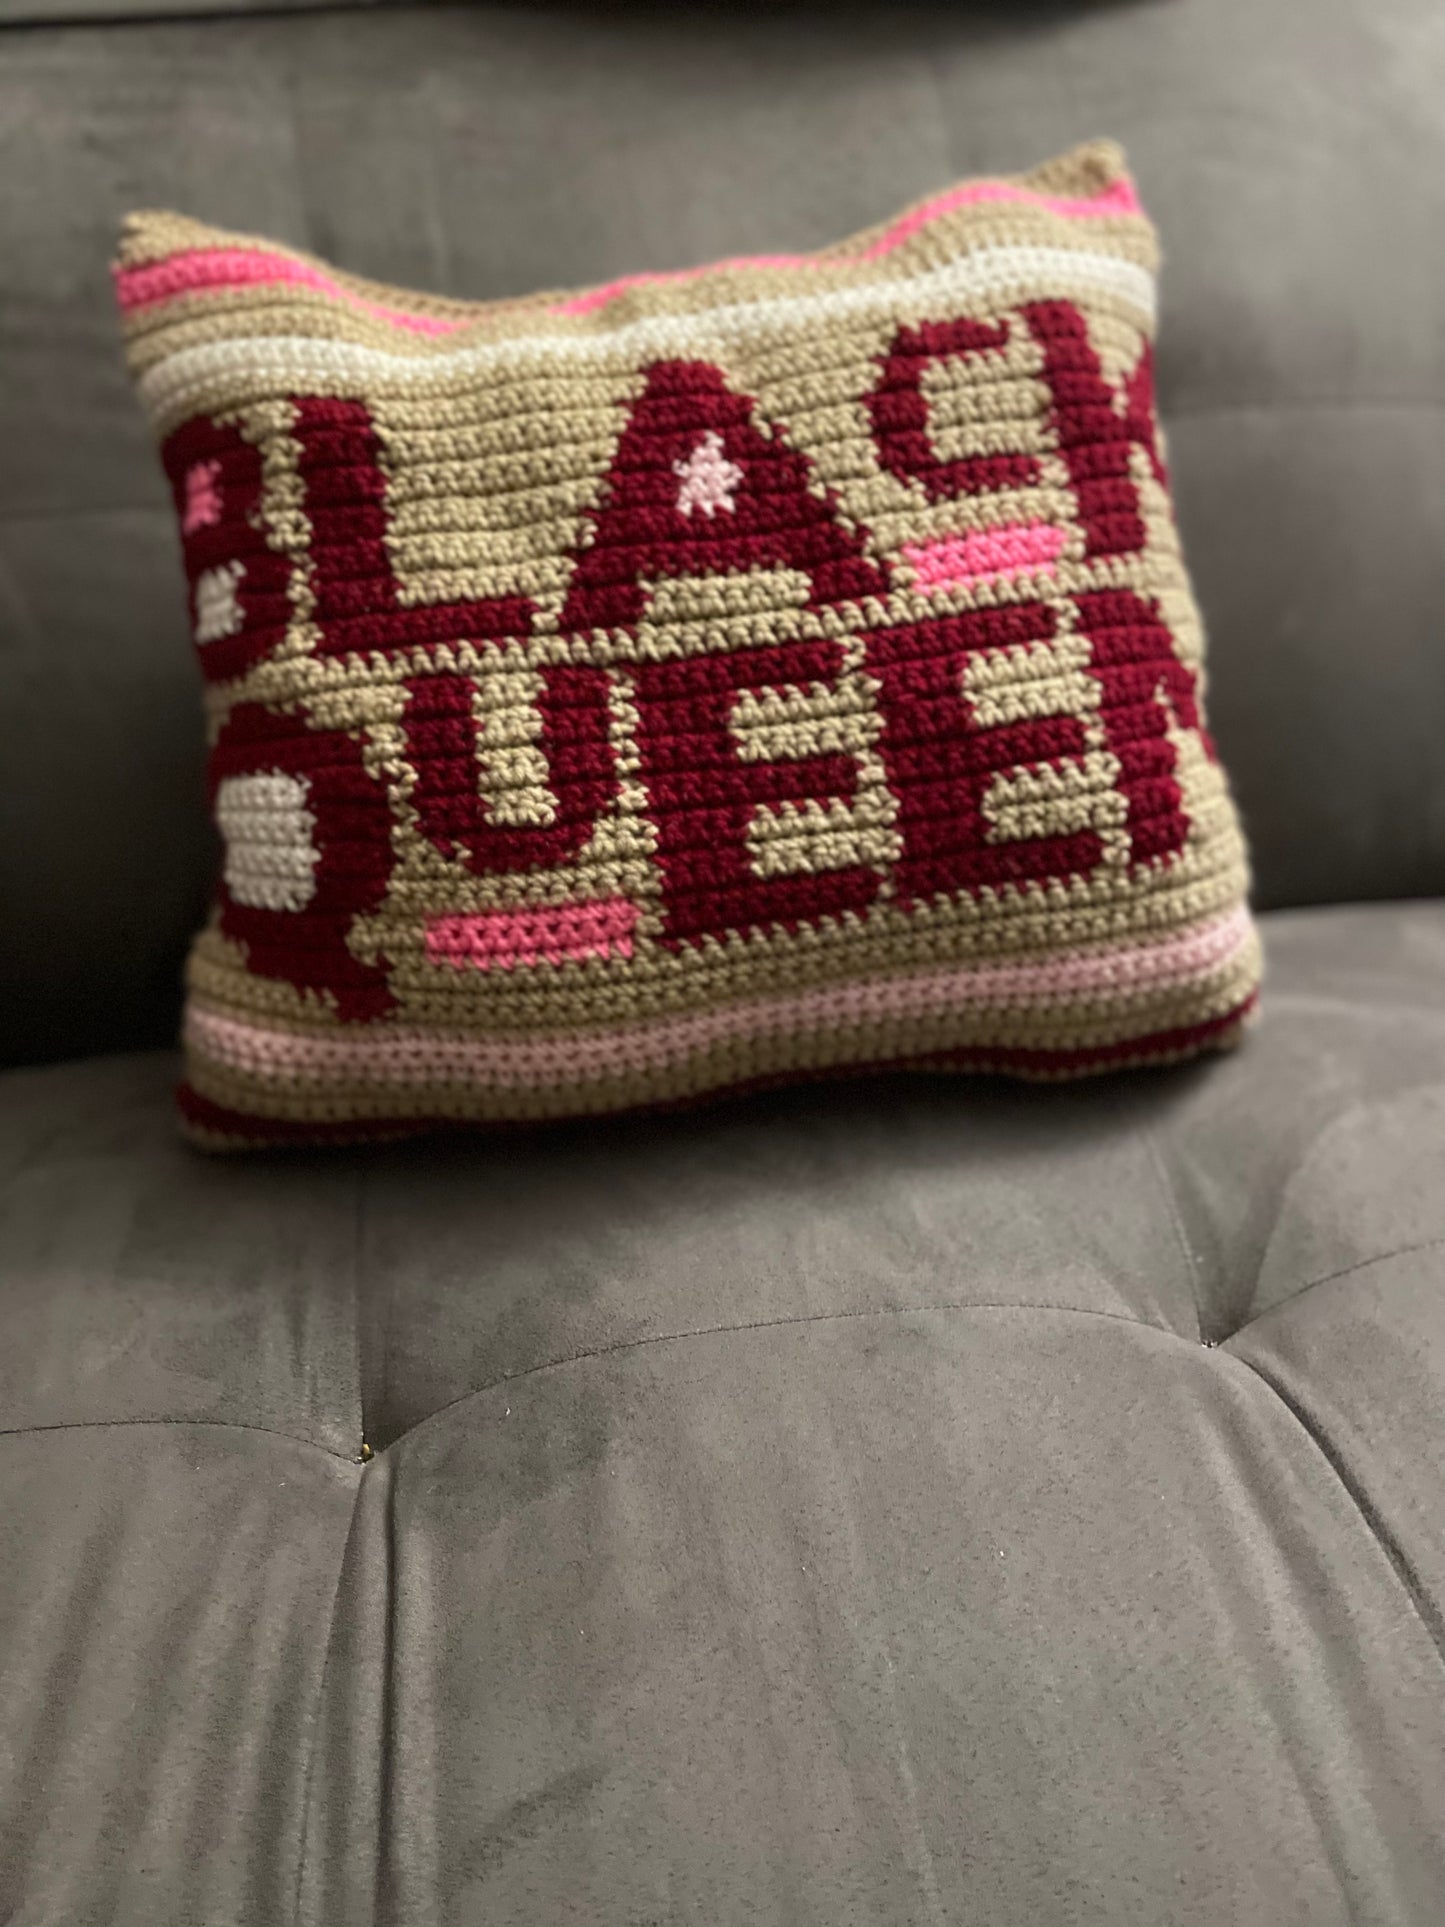 Black Queen Throw Pillow (Made to order)